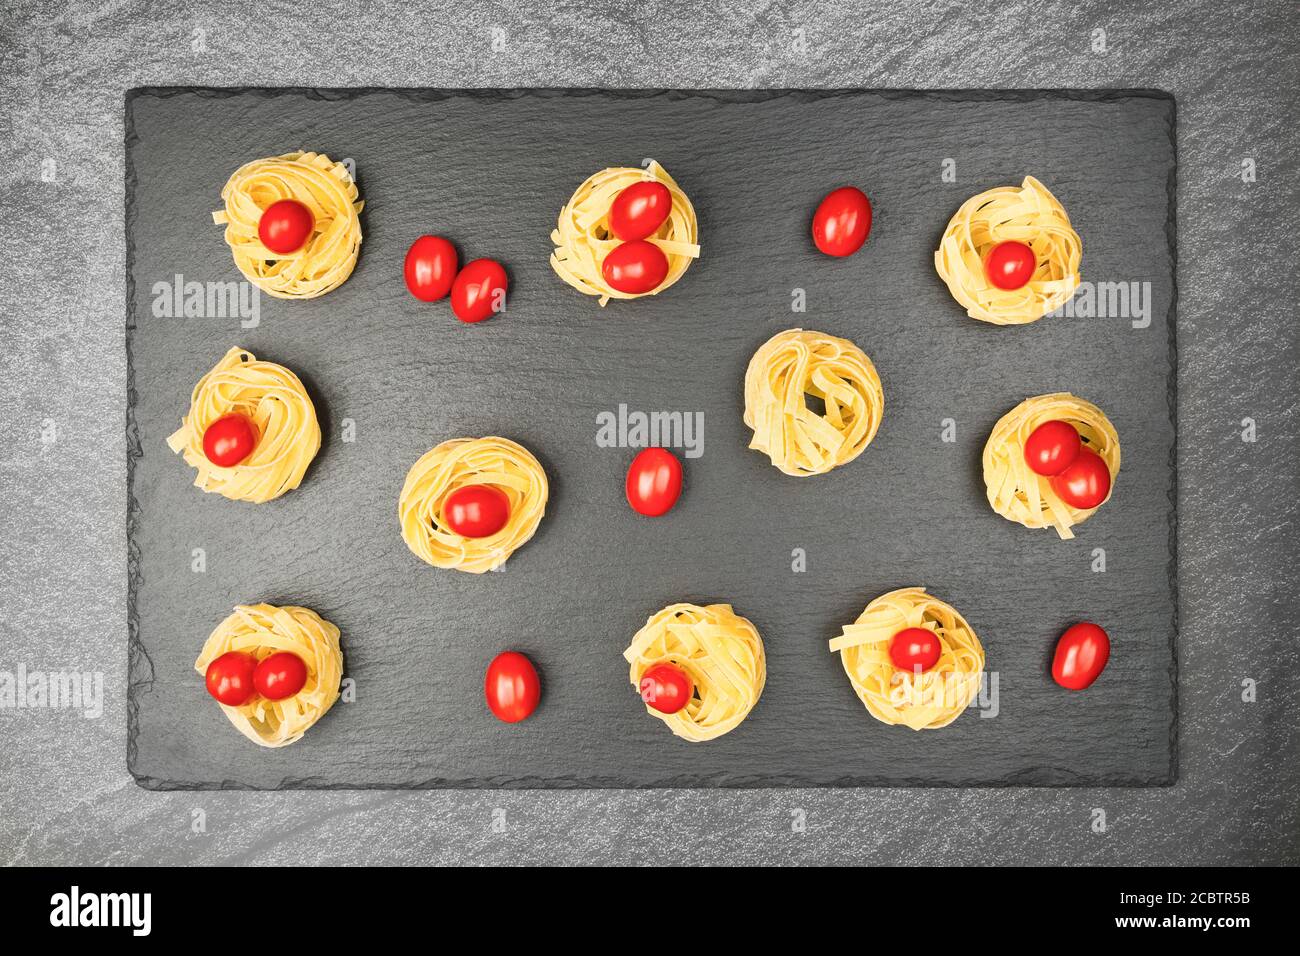 Close up of nests of tagliatelle noodles with egg-shaped mini roma tomatoes on a rustic wooden table wit burlap, Stock Photo